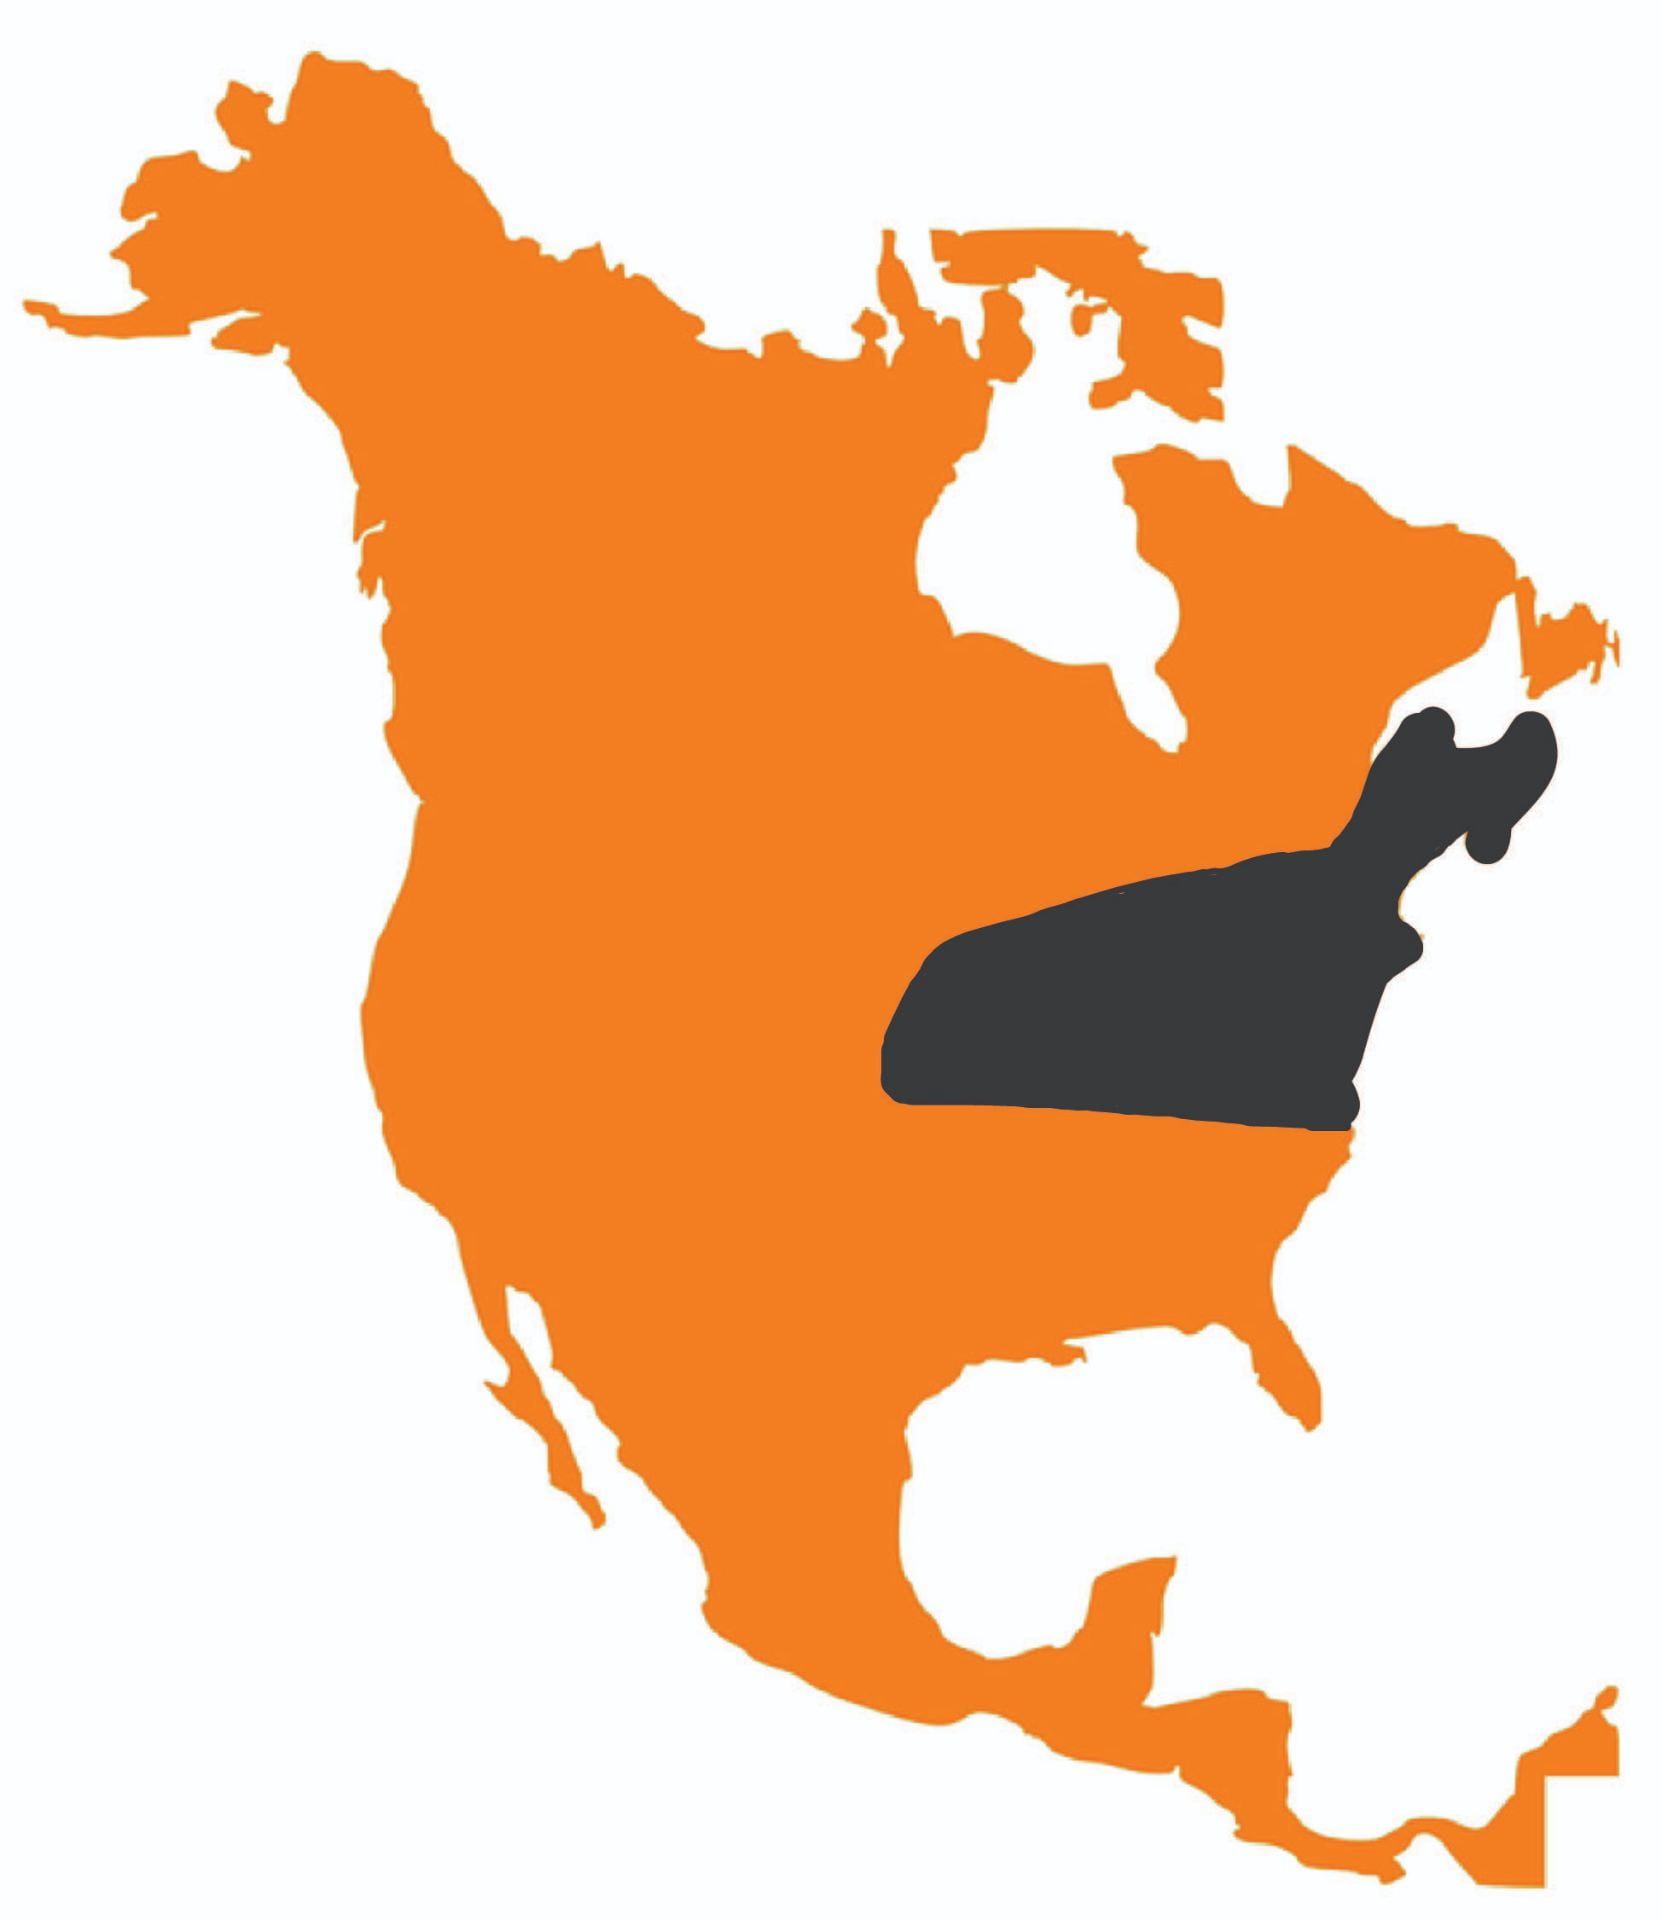 Orange outline of North America, with the coywolf range shaded in black. Indiana to Toronto and Nova Scotia, down to Virginia.